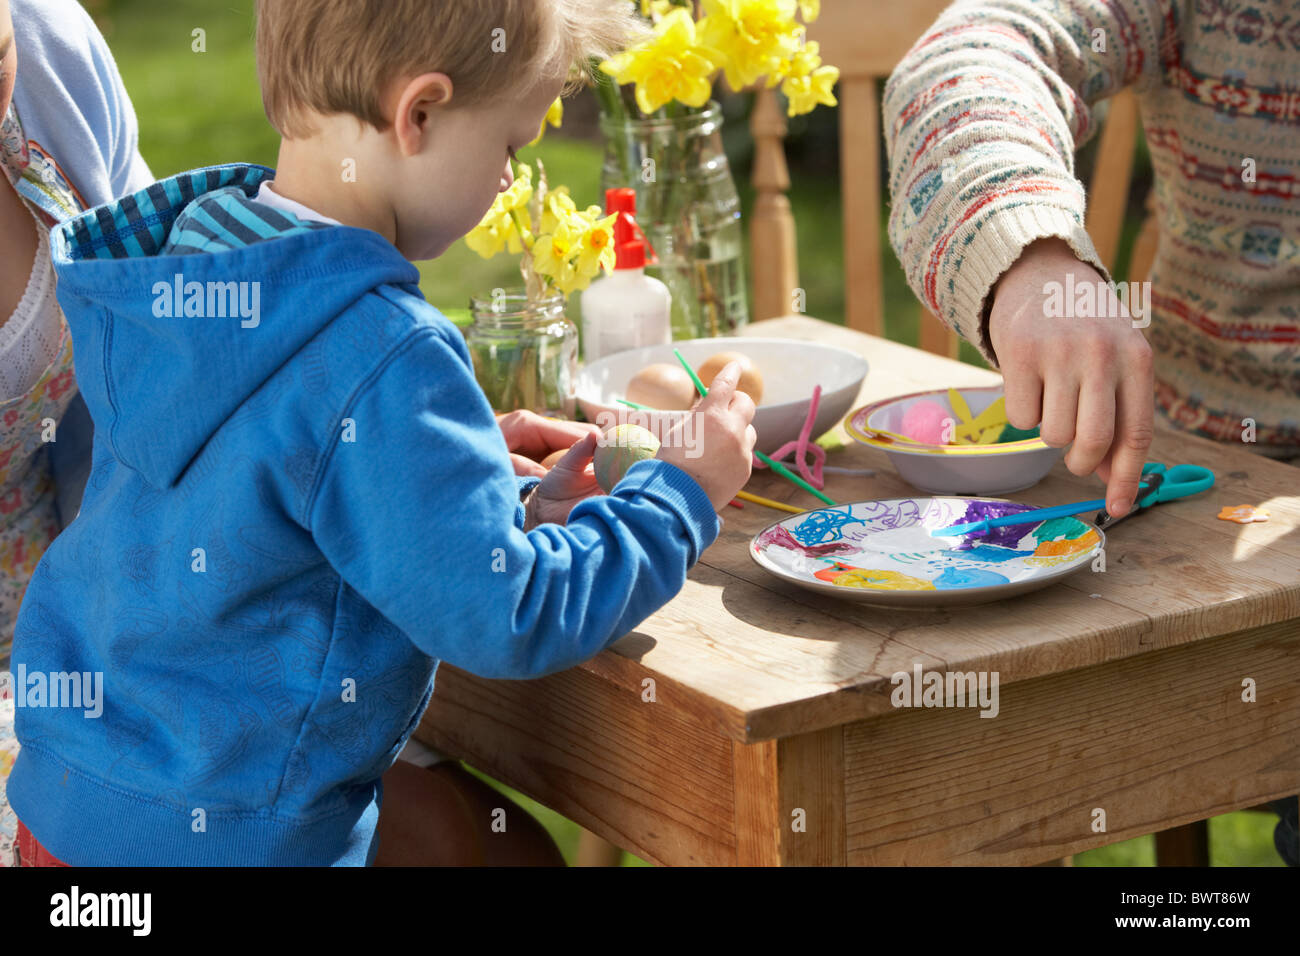 Father And Son Decorating Easter Eggs On Table Outdoors Stock Photo